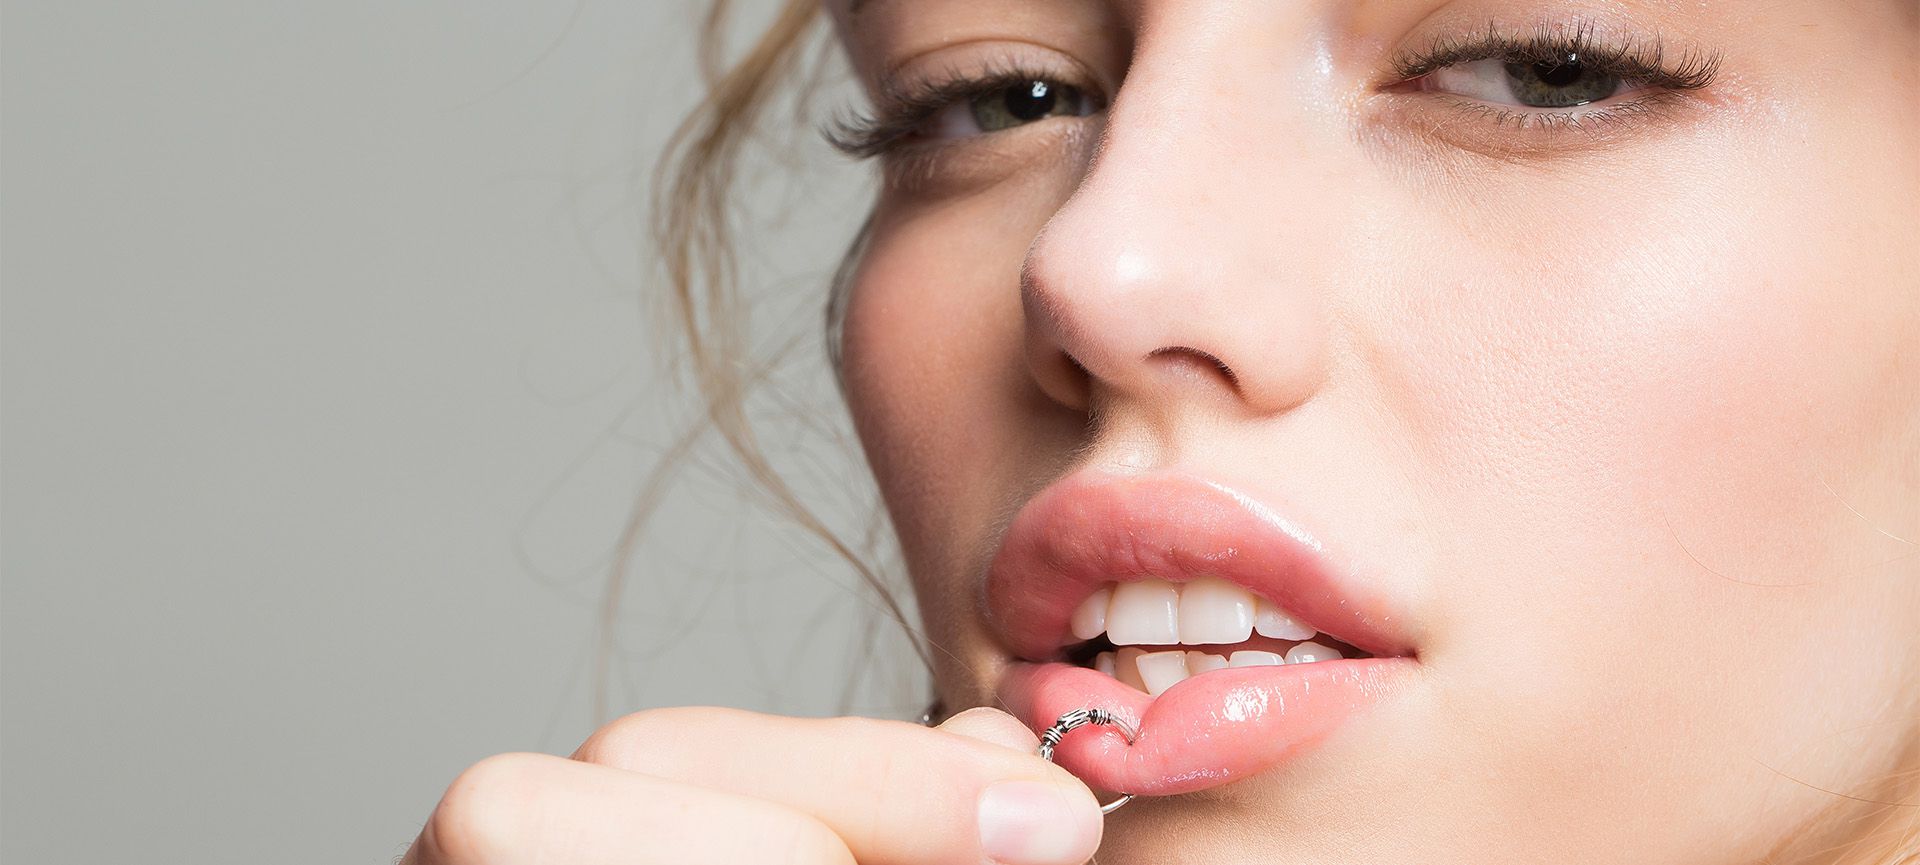 The Different Types of Body Piercings You Can Get and Their